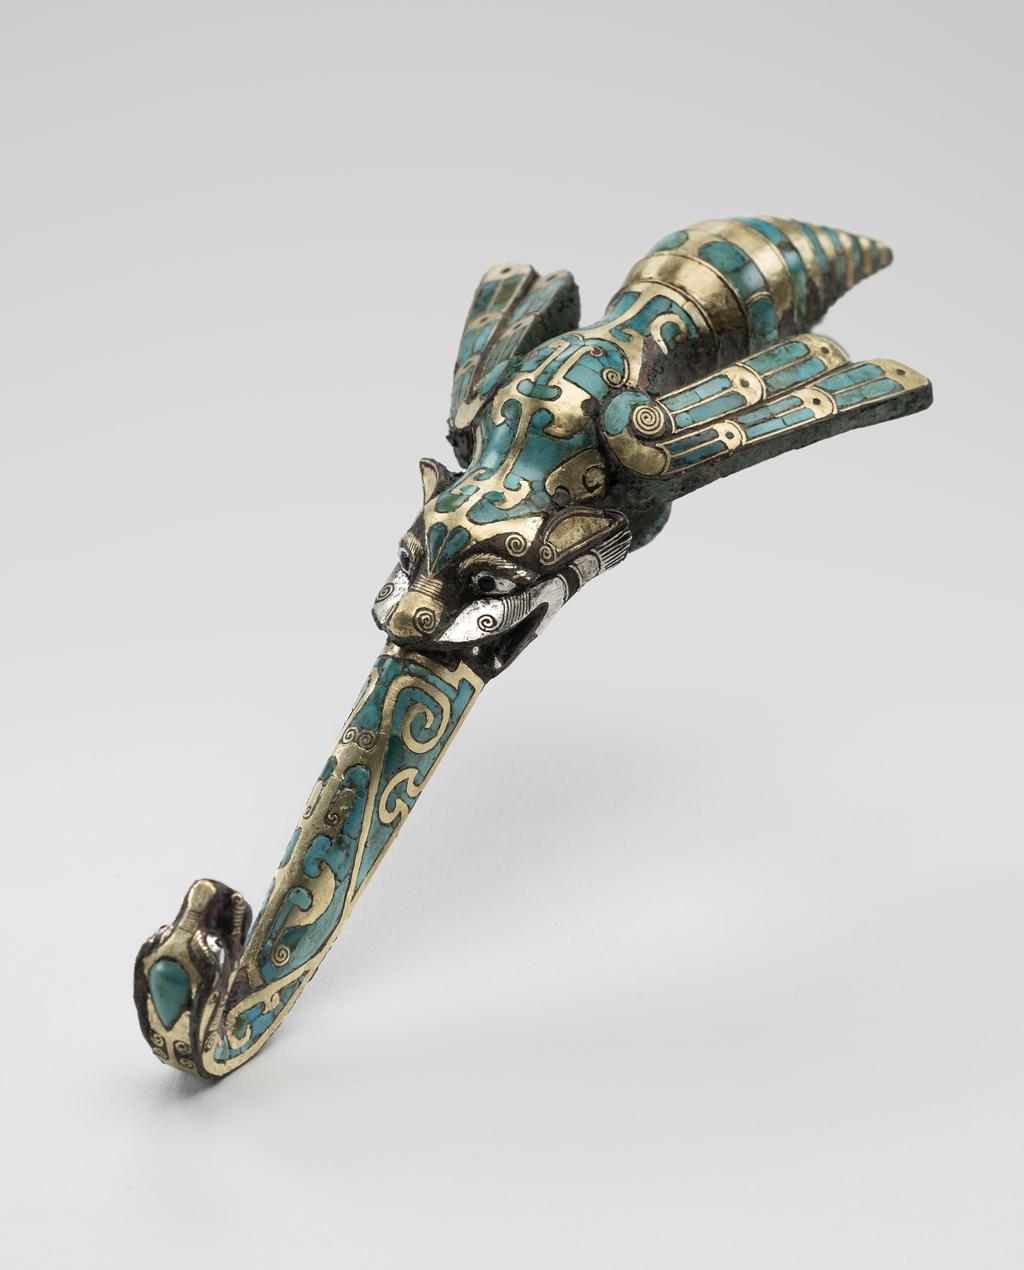 Bronze, gold, silver and turquoise belt hook, daigou